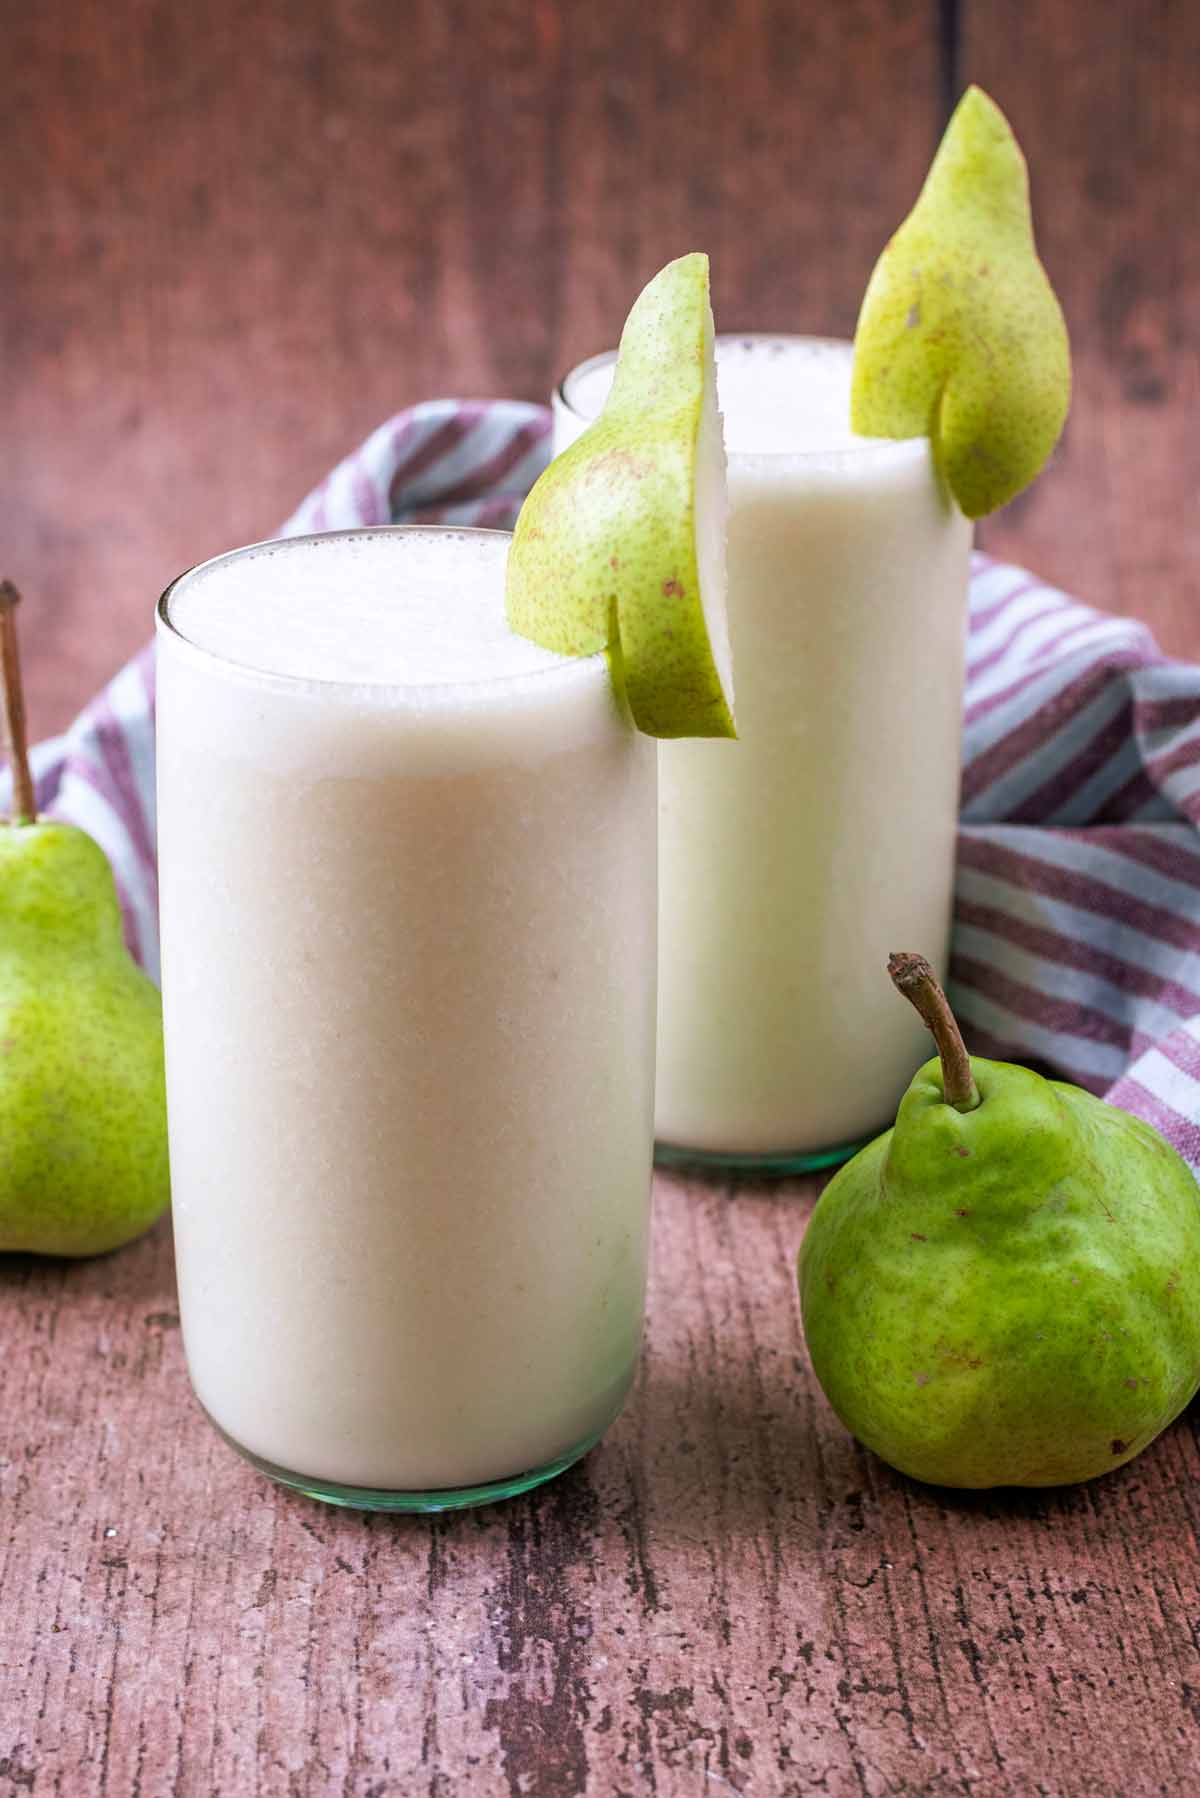 Two glasses of cream coloured smoothie next to two whole pears.